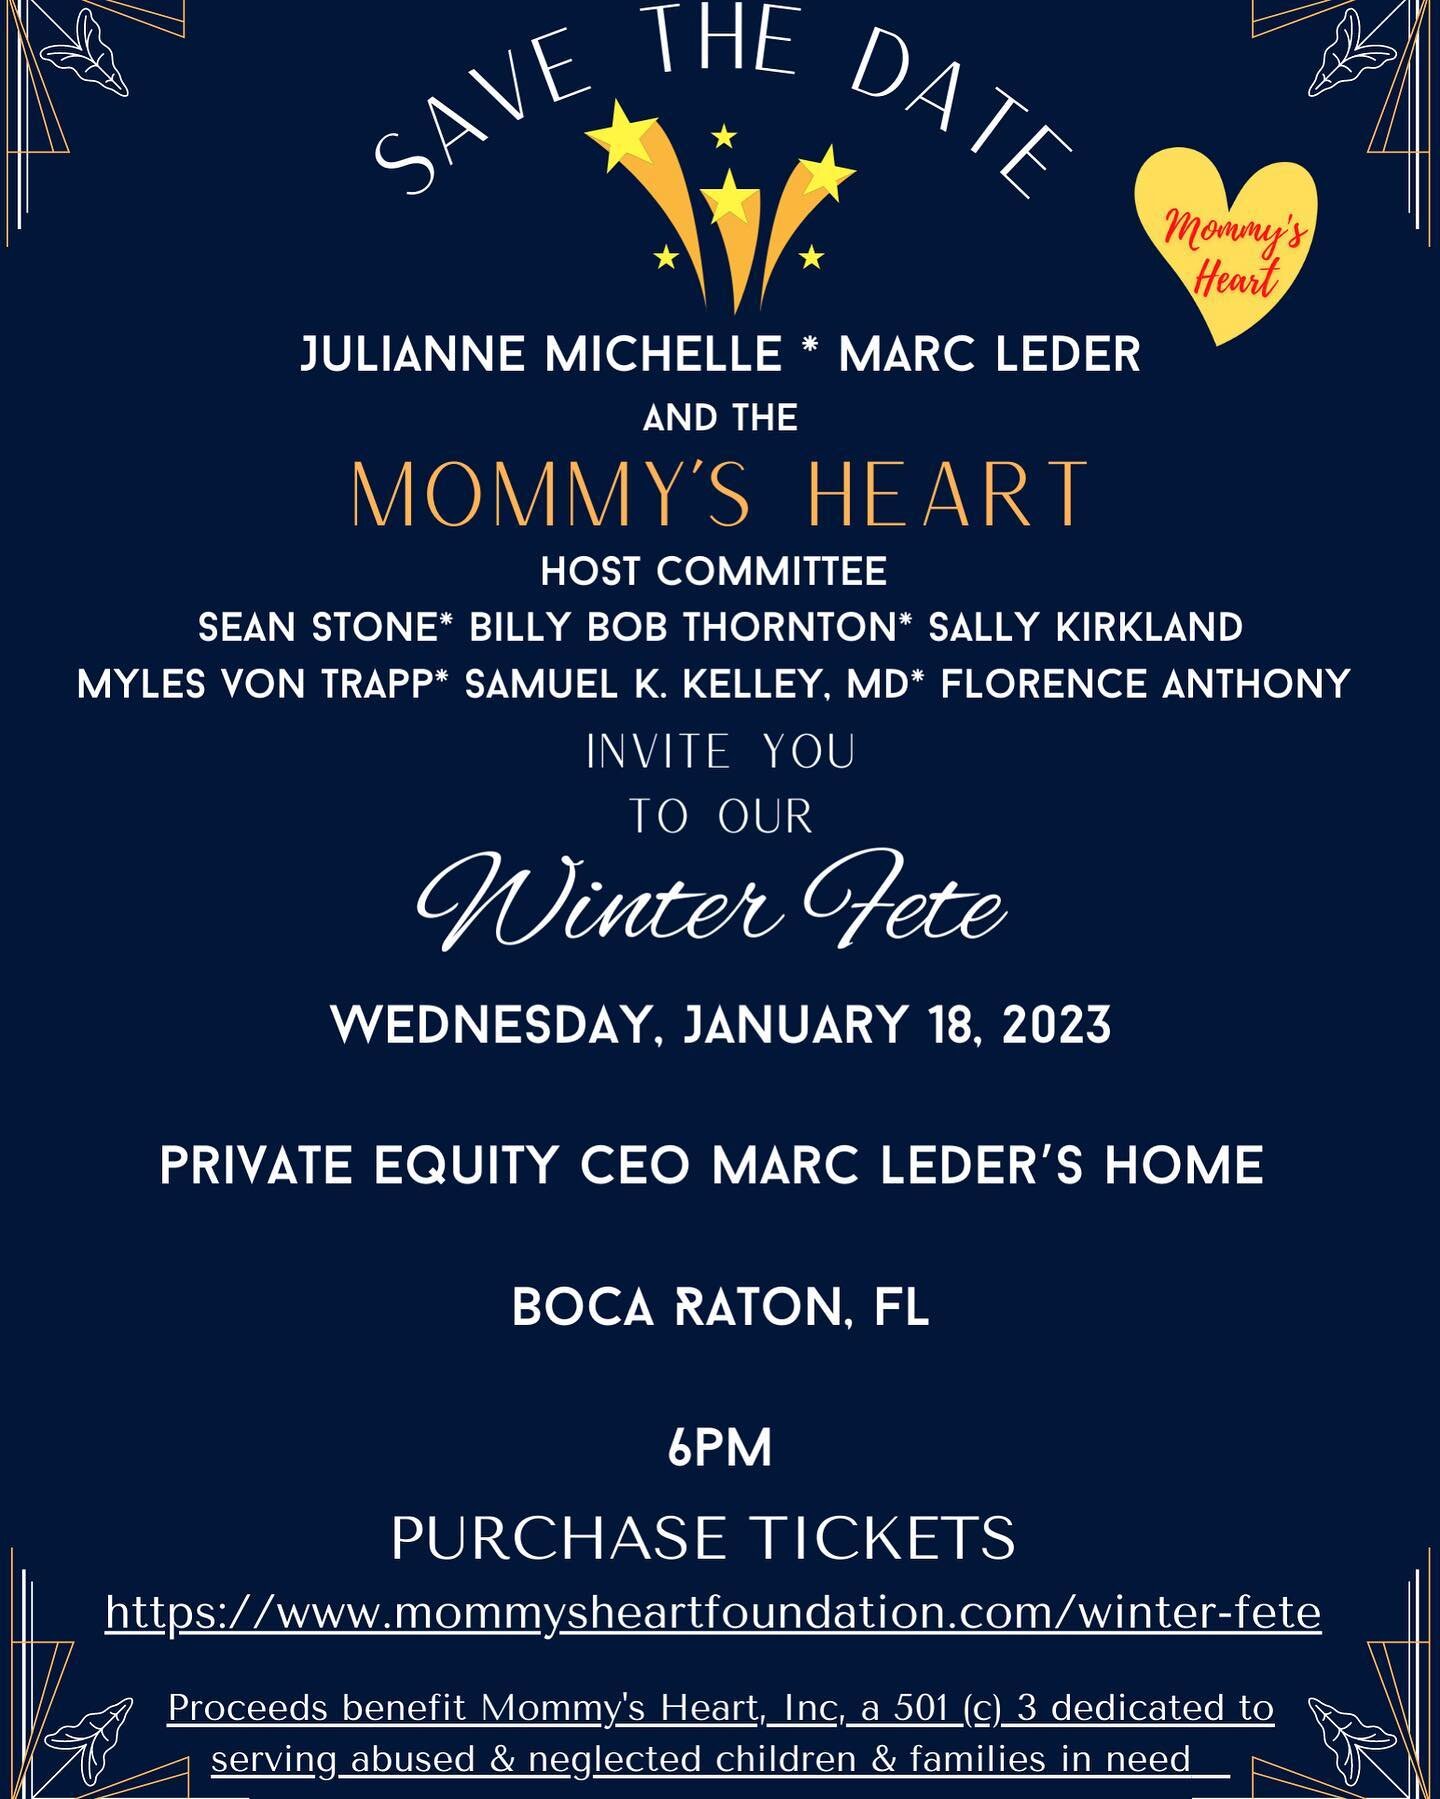 Join us to support a VERY important cause for abused and neglected children and families this January 18, 2023 in Boca Raton, FL!! 💕💕🙏❤️ It will be a special evening of cocktails, dinner, silent and live auction, DJ, and dancing, including live pe